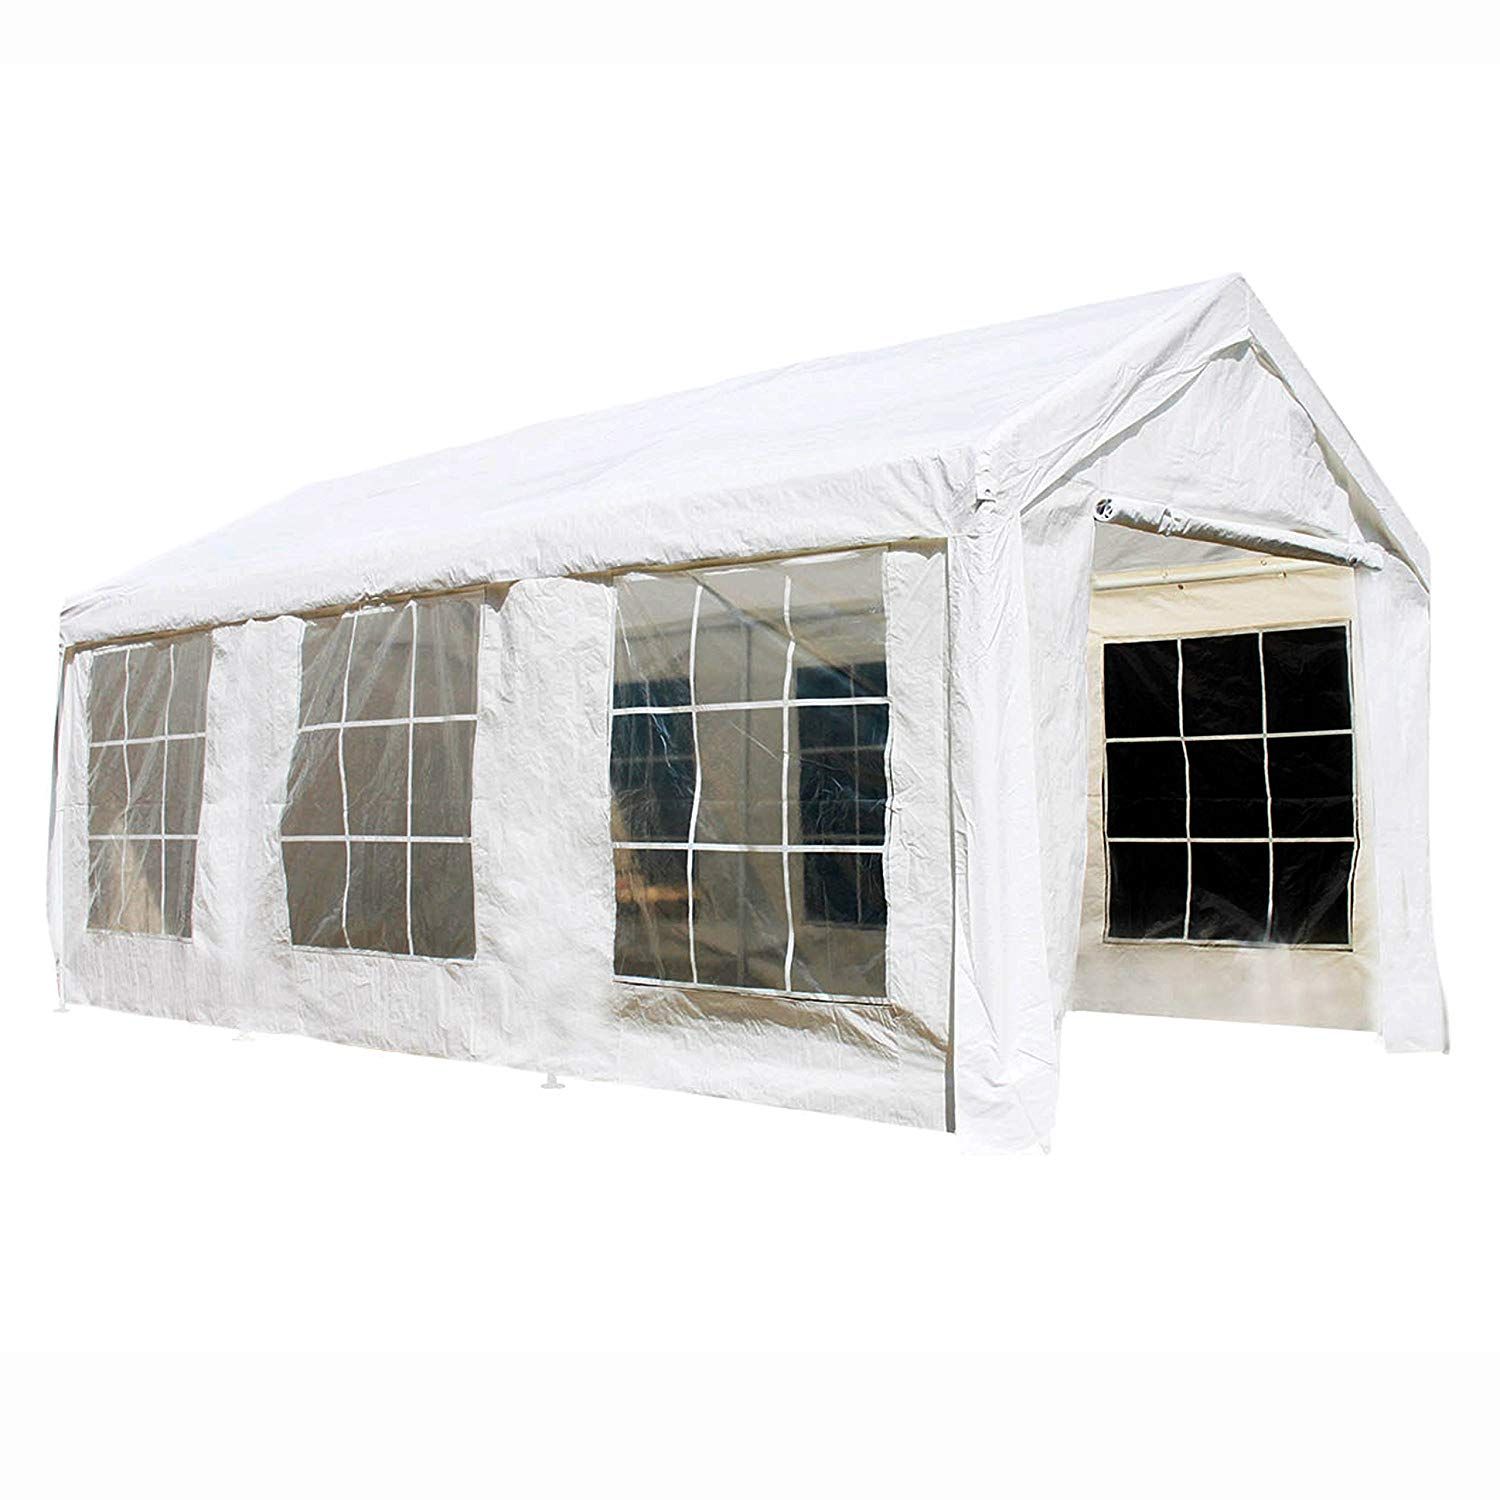 ALEKO CPWT1020 Outdoor Event Gazebo Canopy Tent with Sidewalls and Windows 10 x 20 x 8 Feet White